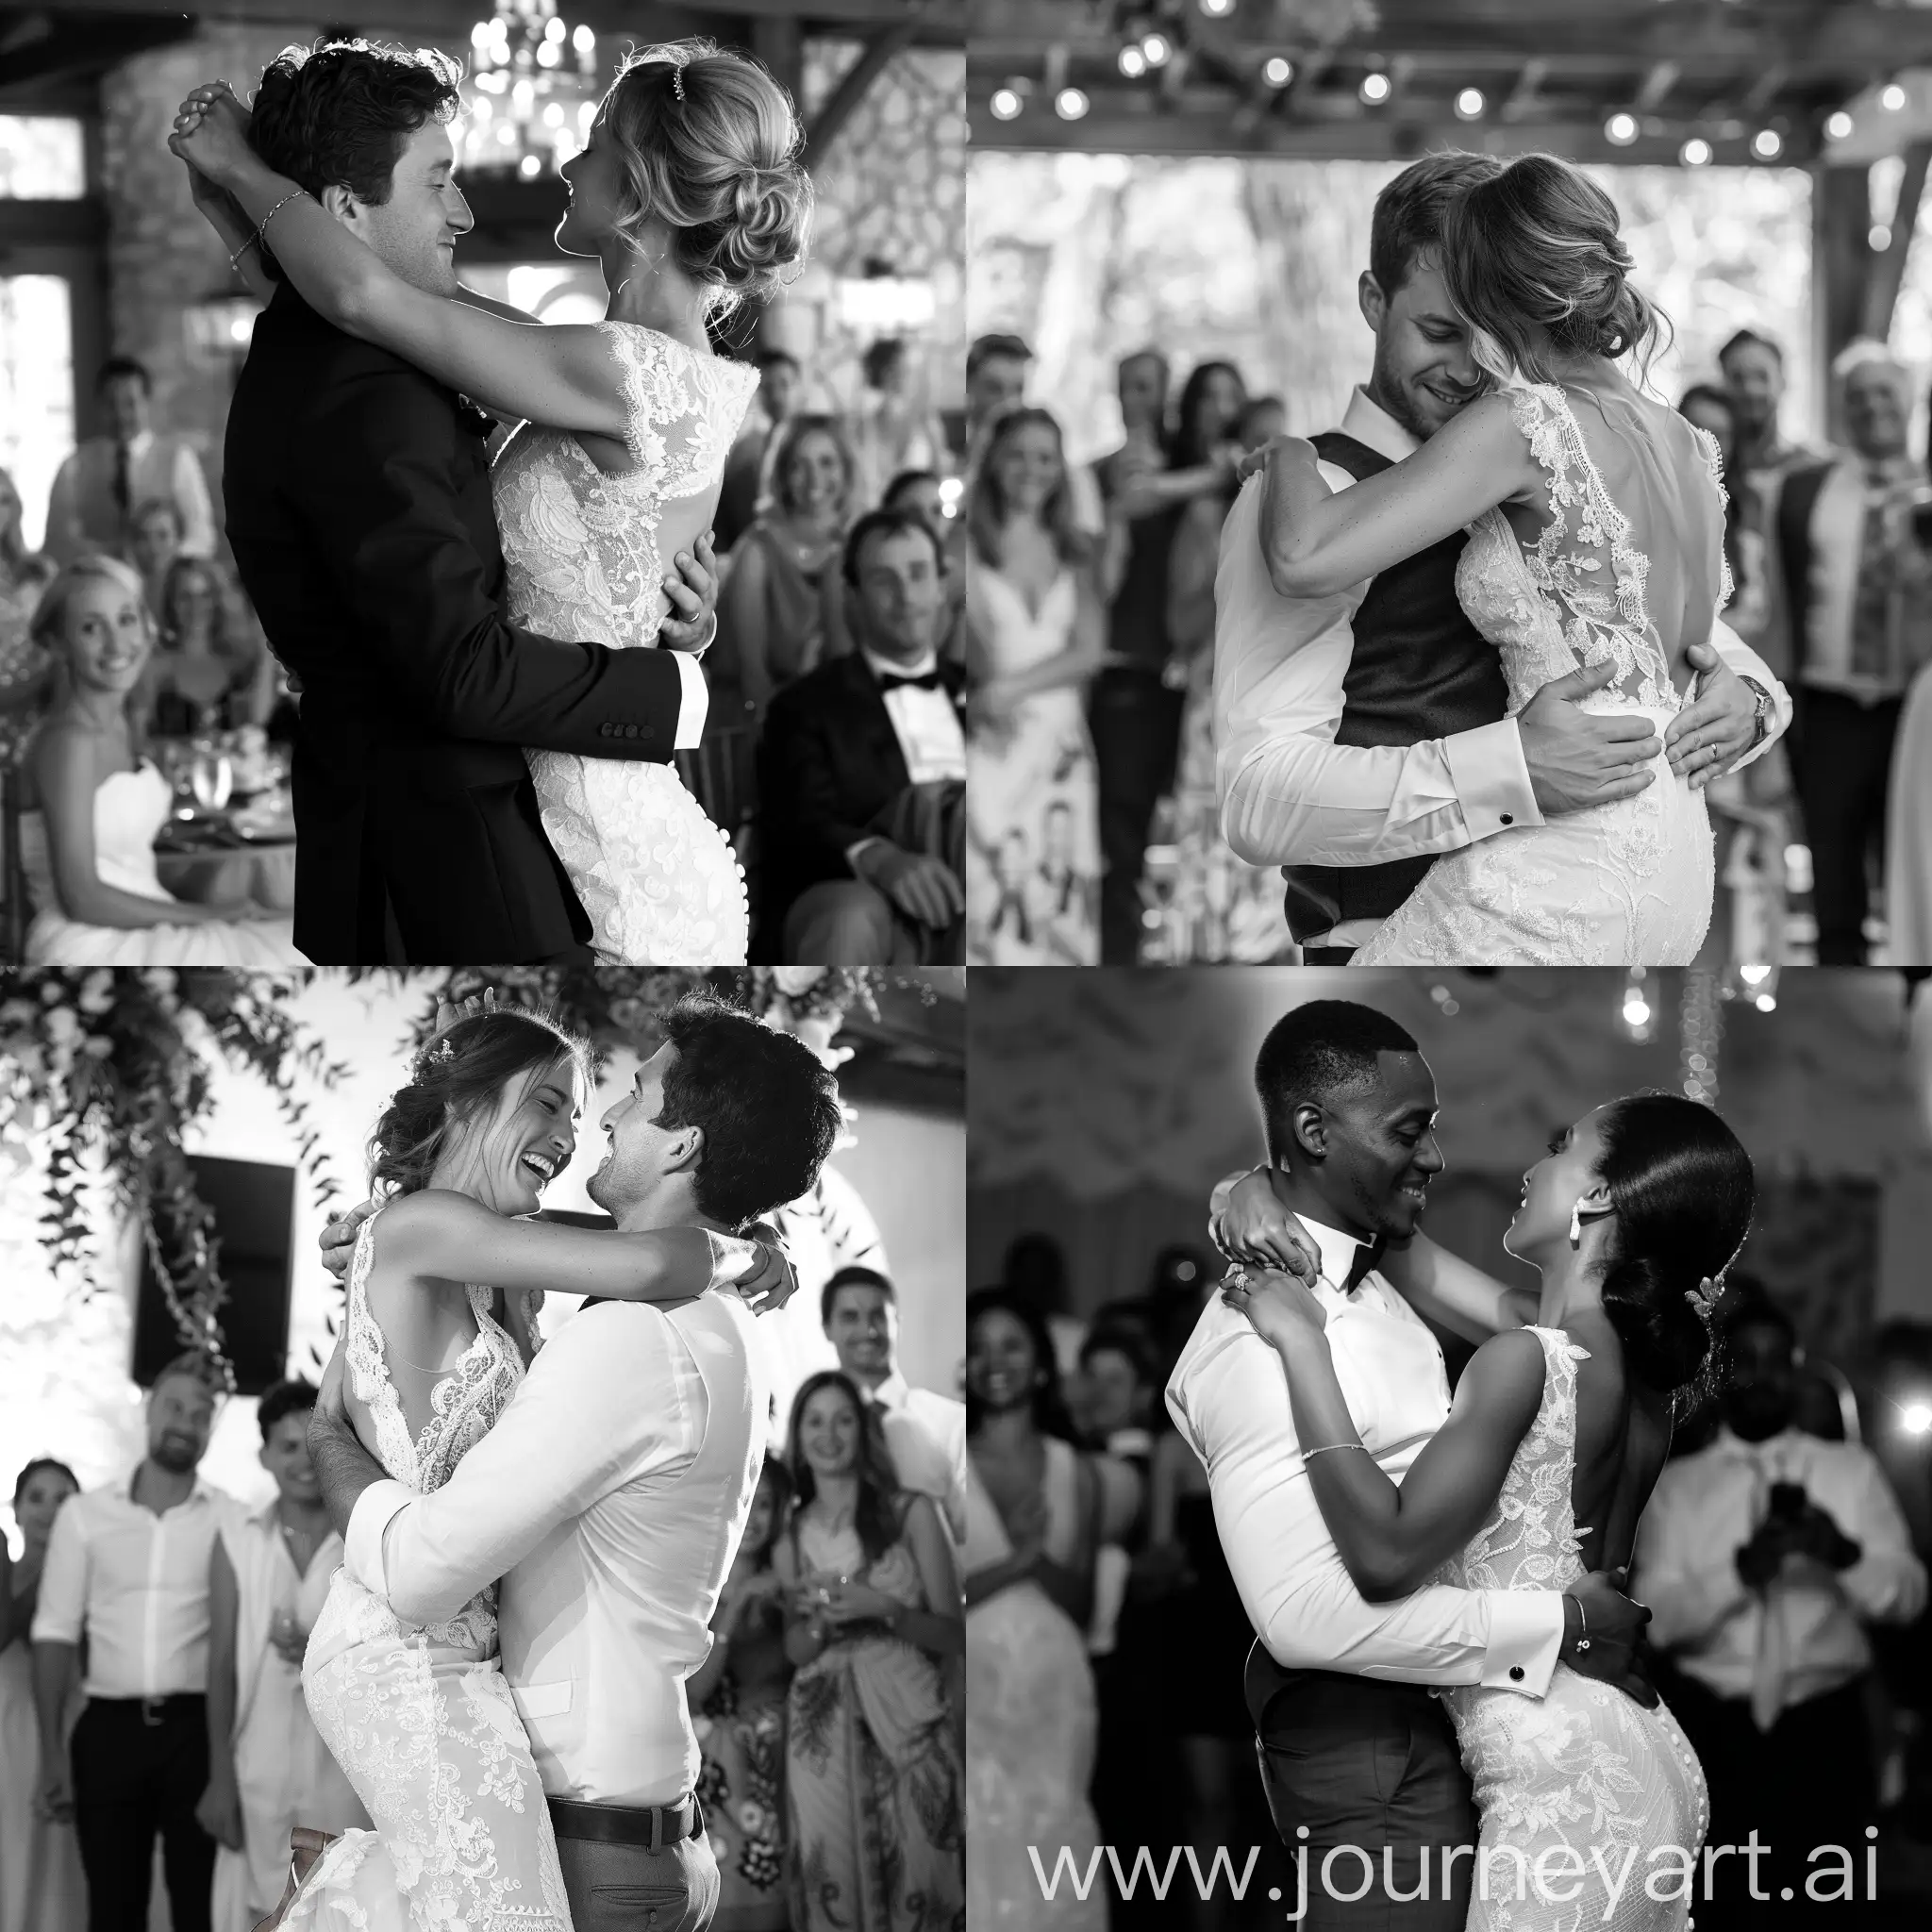 Joyful-First-Dance-Moment-Groom-Lifting-Bride-with-Grace